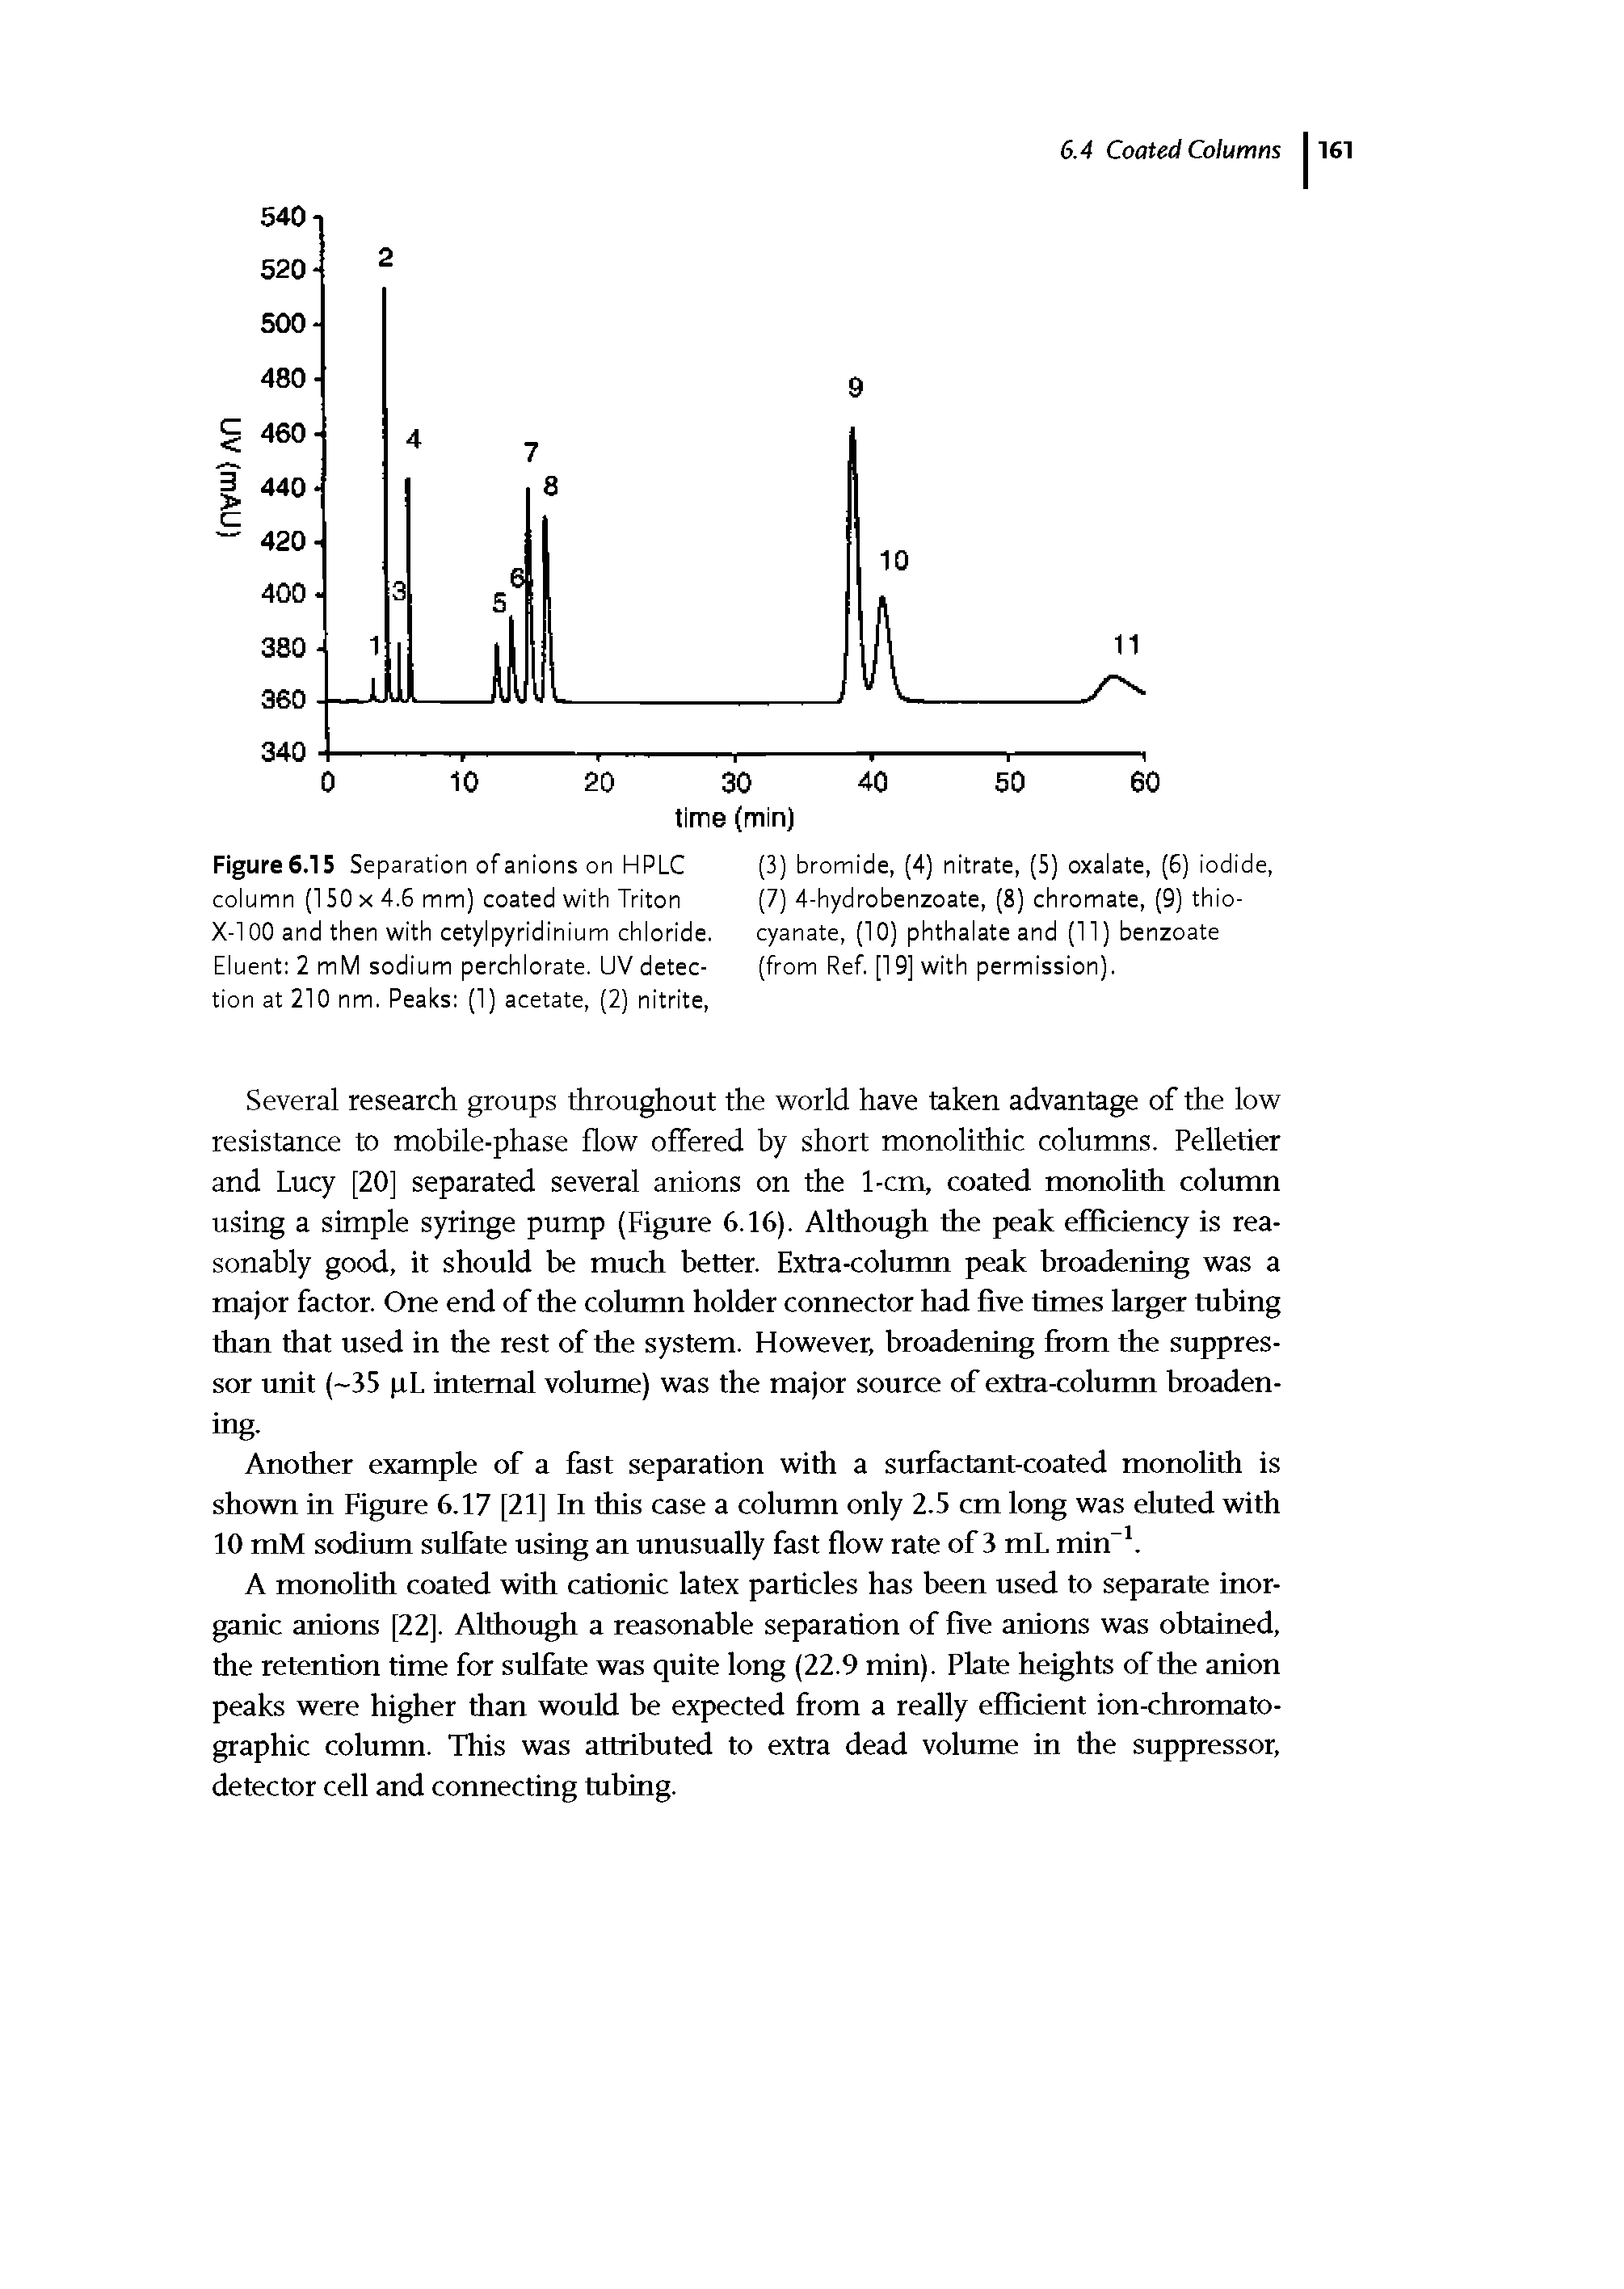 Figure6.15 Separation ofanions on HPLC column (150 X 4.6 mm) coated with Triton X-100 and then with cetylpyridinium chloride. Eluent 2 mM sodium perchlorate. UV detection at 210 nm. Peaks (1) acetate, (2) nitrite,...